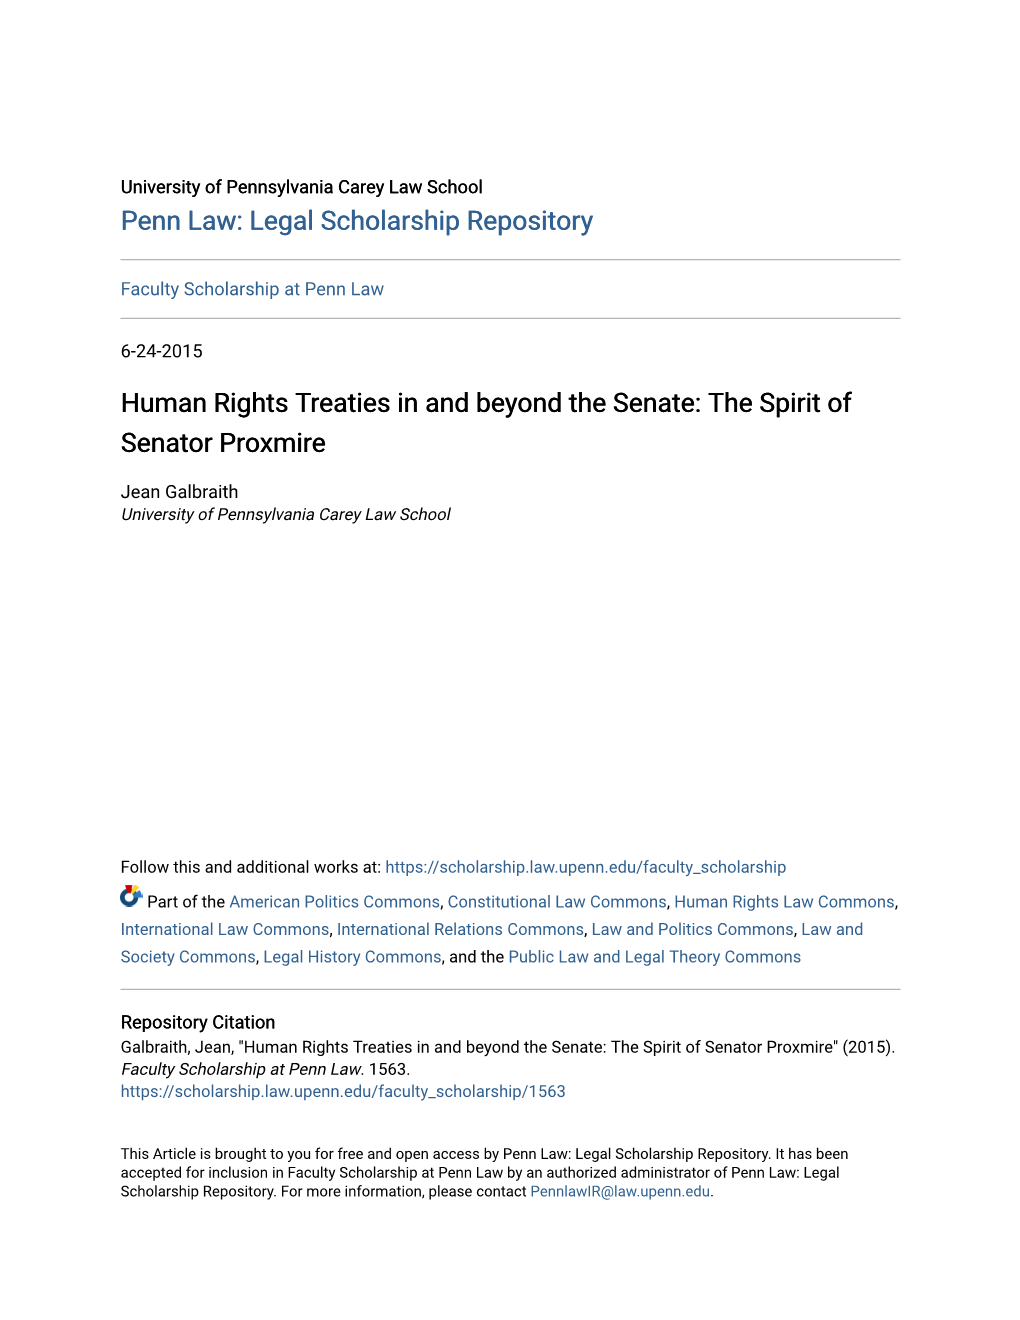 Human Rights Treaties in and Beyond the Senate: the Spirit of Senator Proxmire